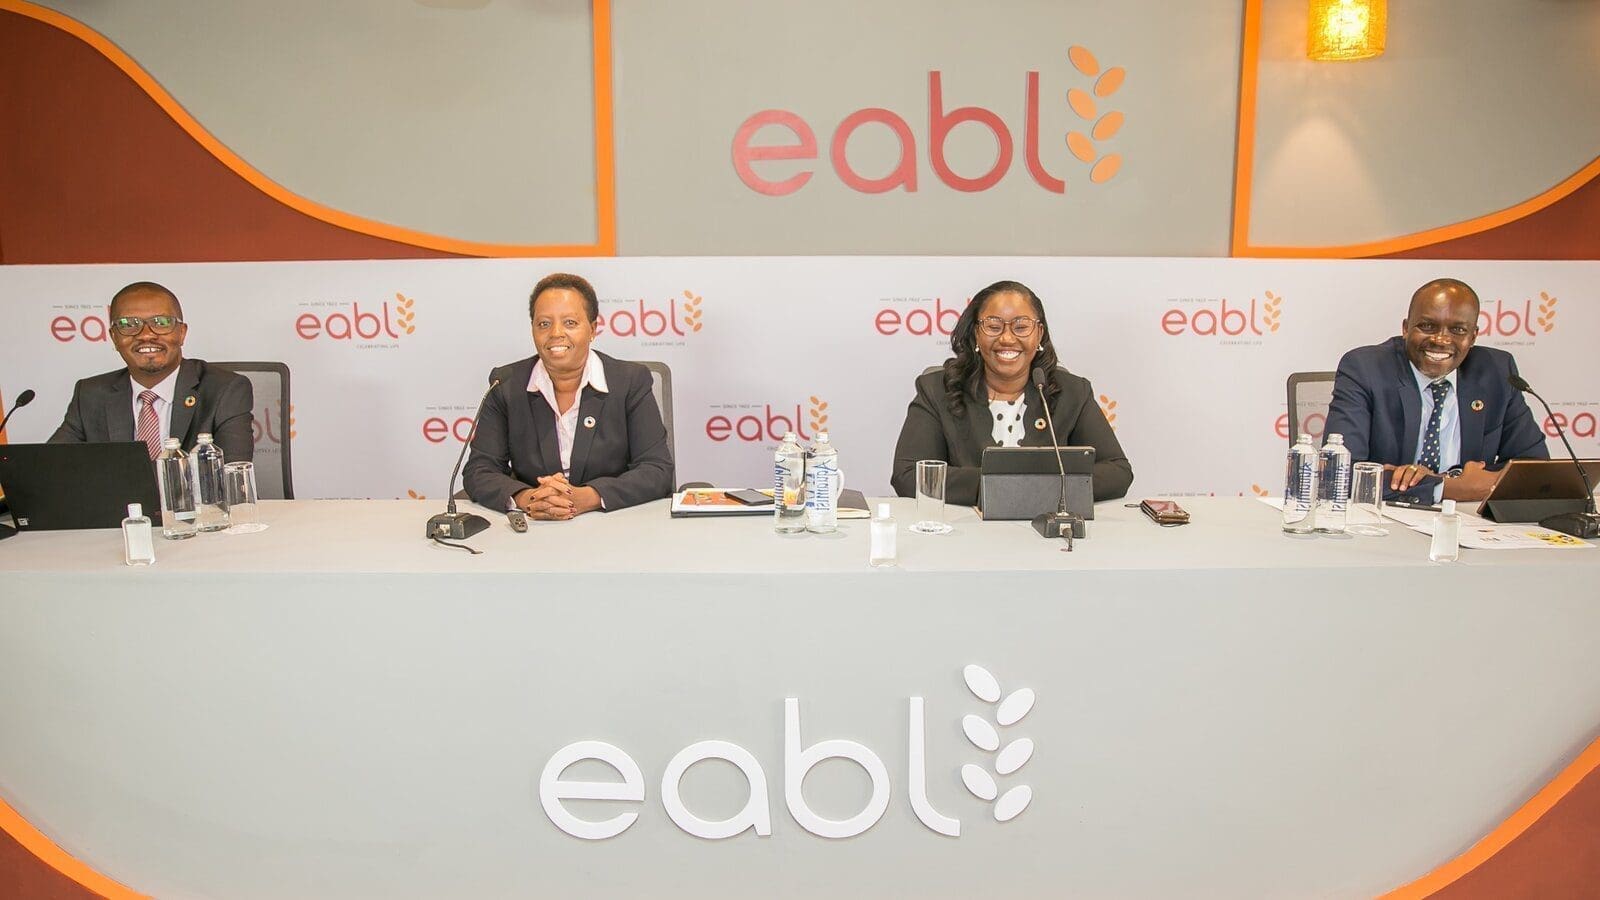 EABL initiates massive layoffs, introduces a 26-week paid pregnancy loss leave